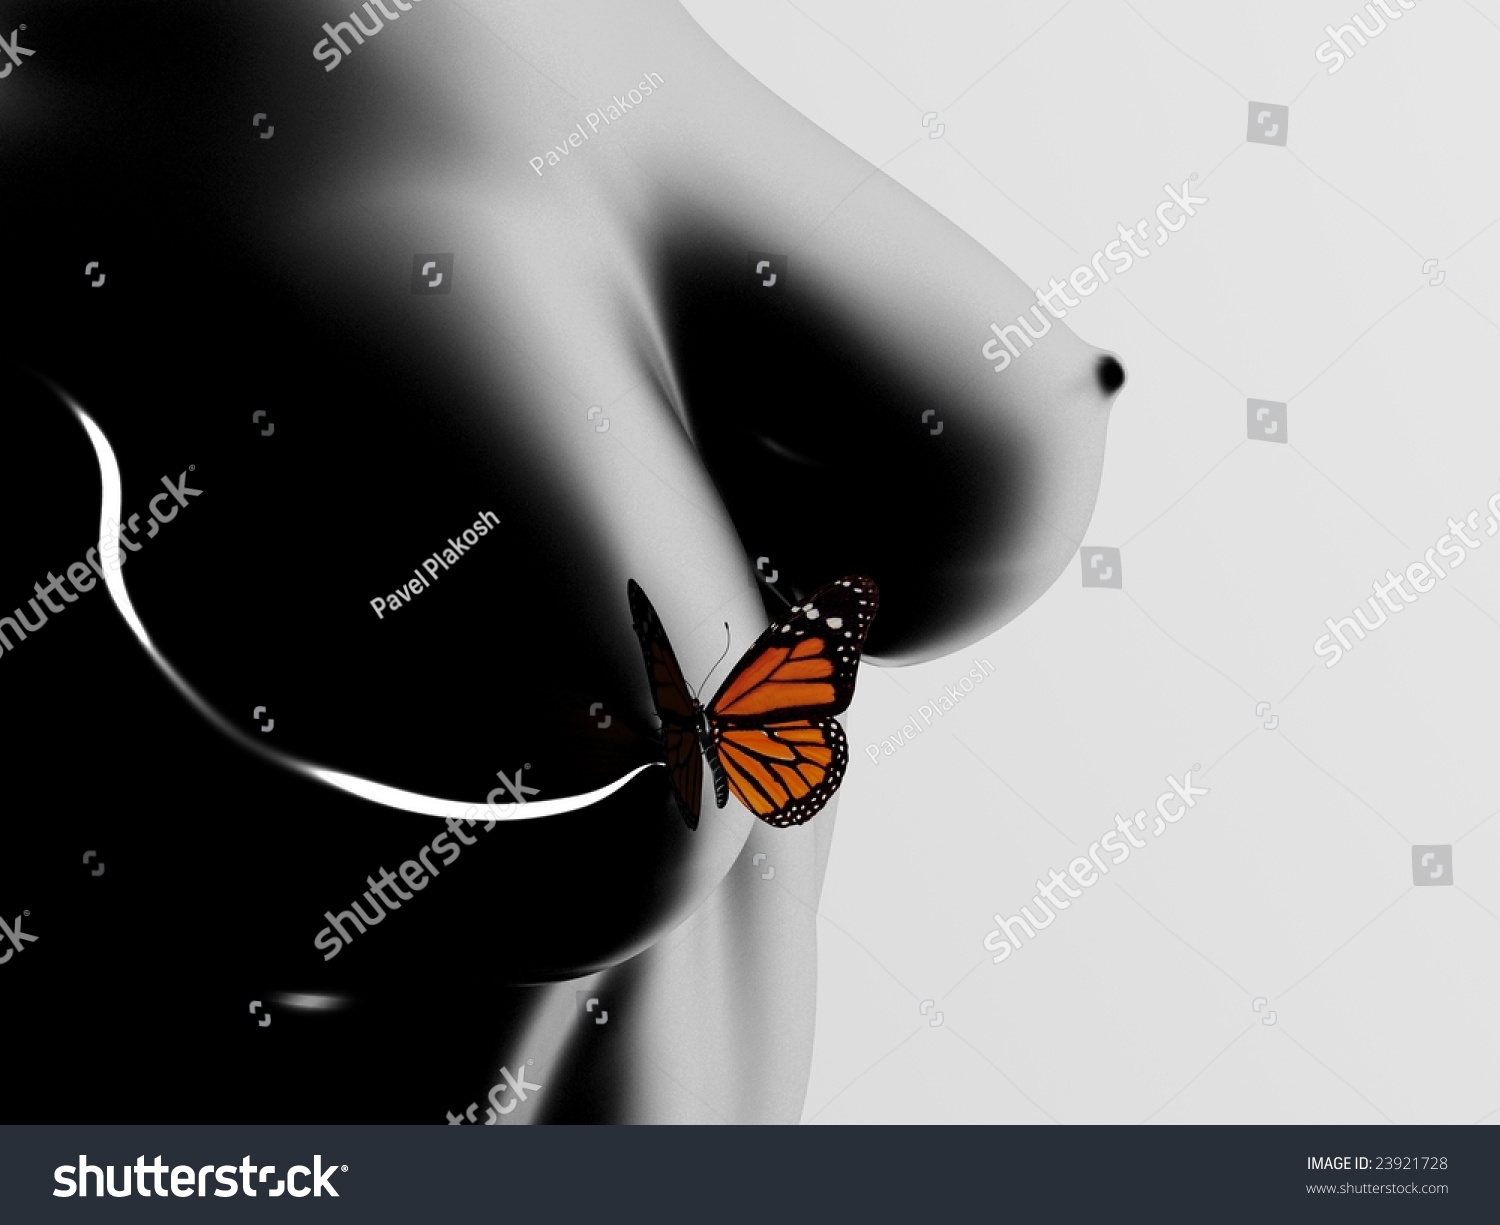 Butterfly - nude photos